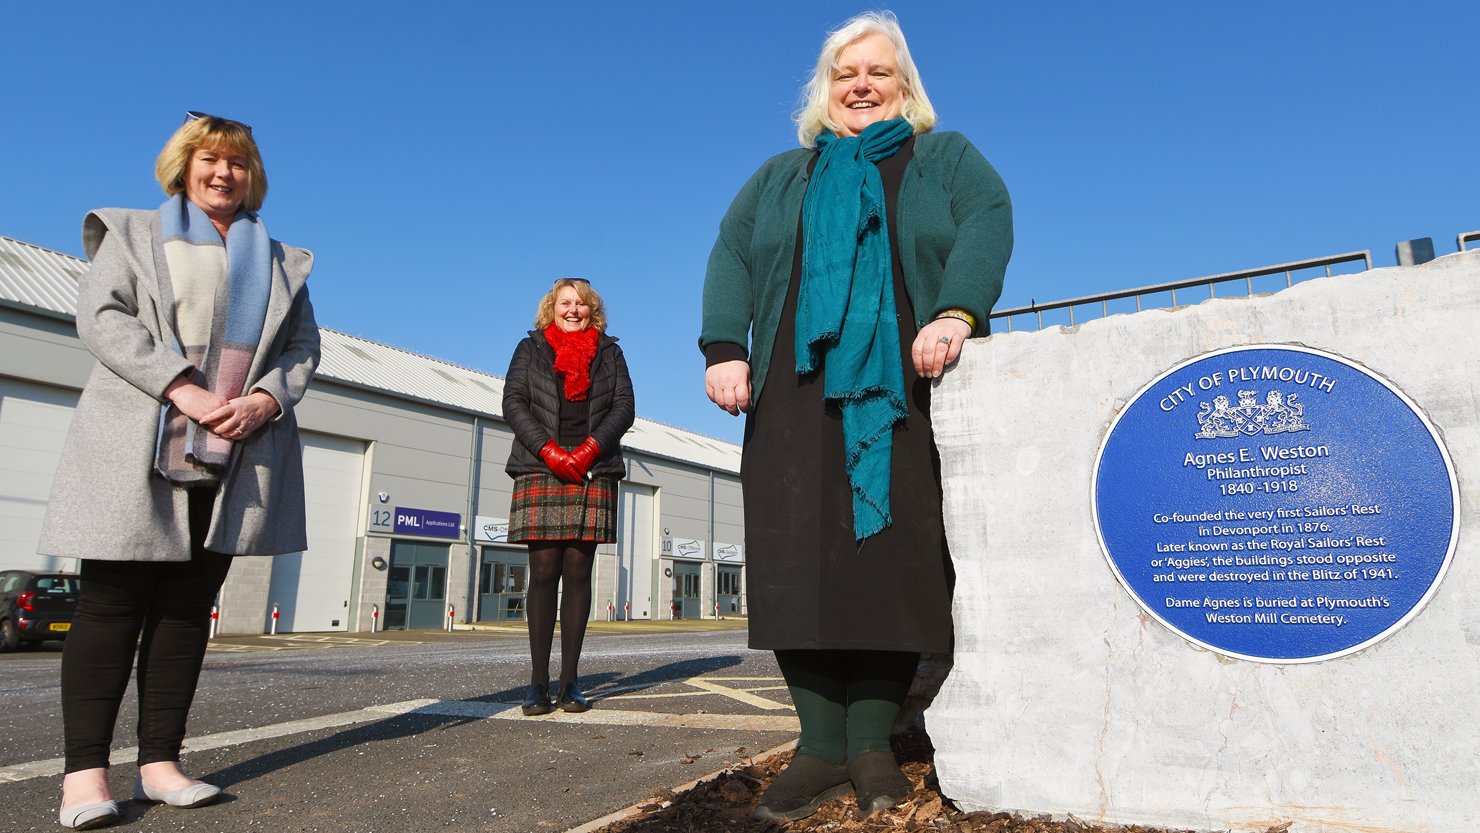 From L-R: Councillor Sally Haydon, Councillor Sue Dann and Councillor Jemima Laing visited the Aggie Weston plaque to mark International Women's Day 2021